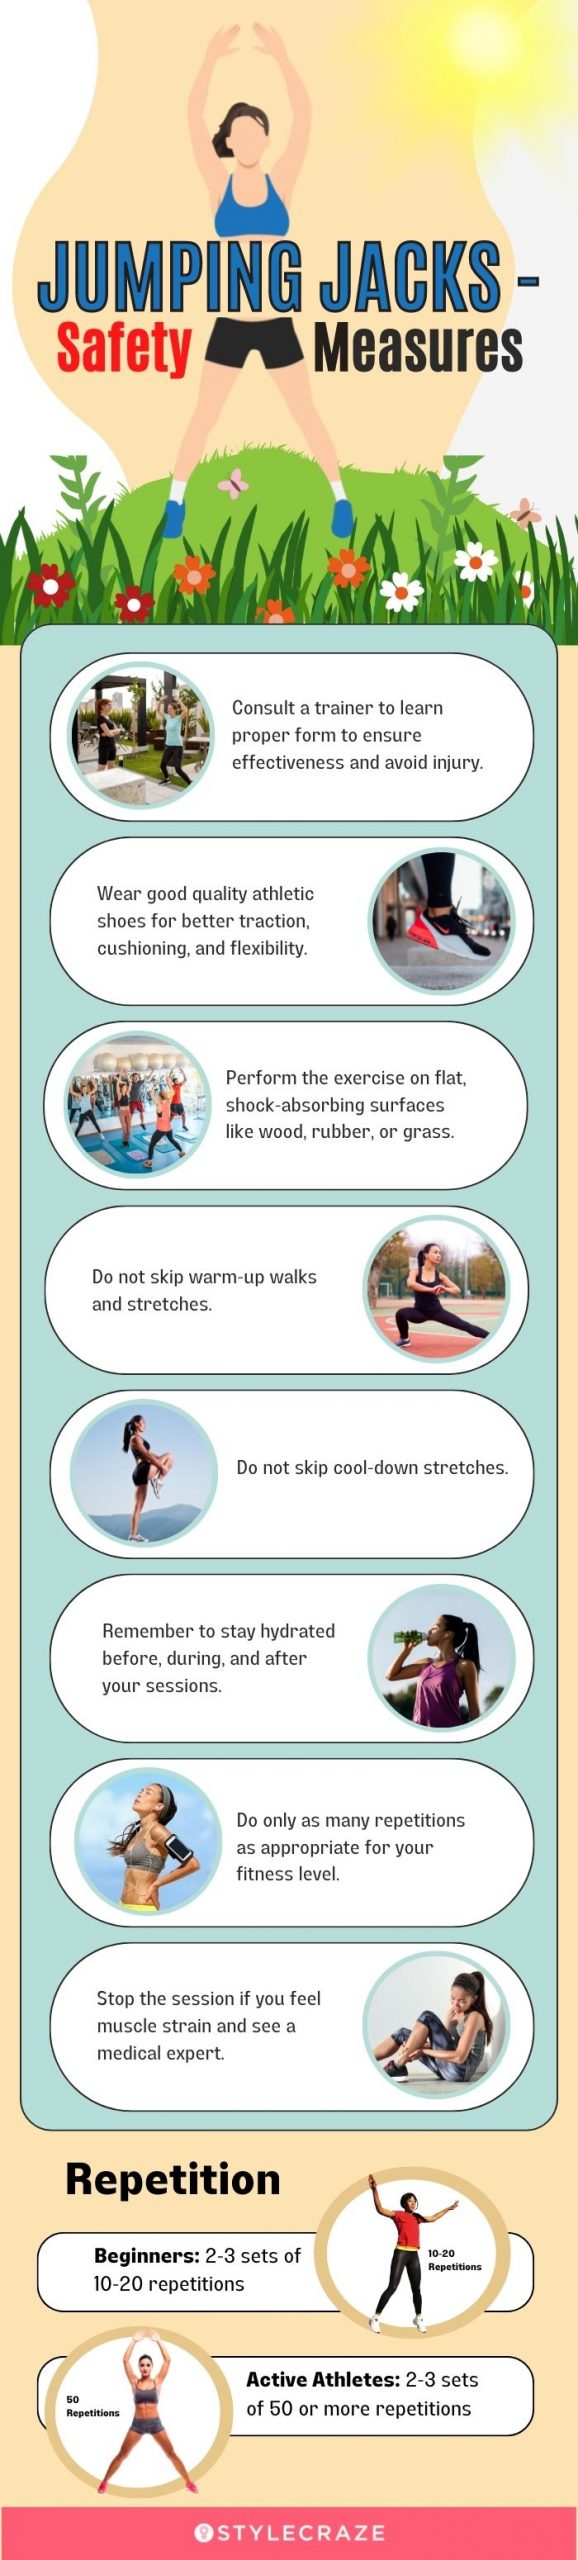 jumping jacks safety measures [infographic]